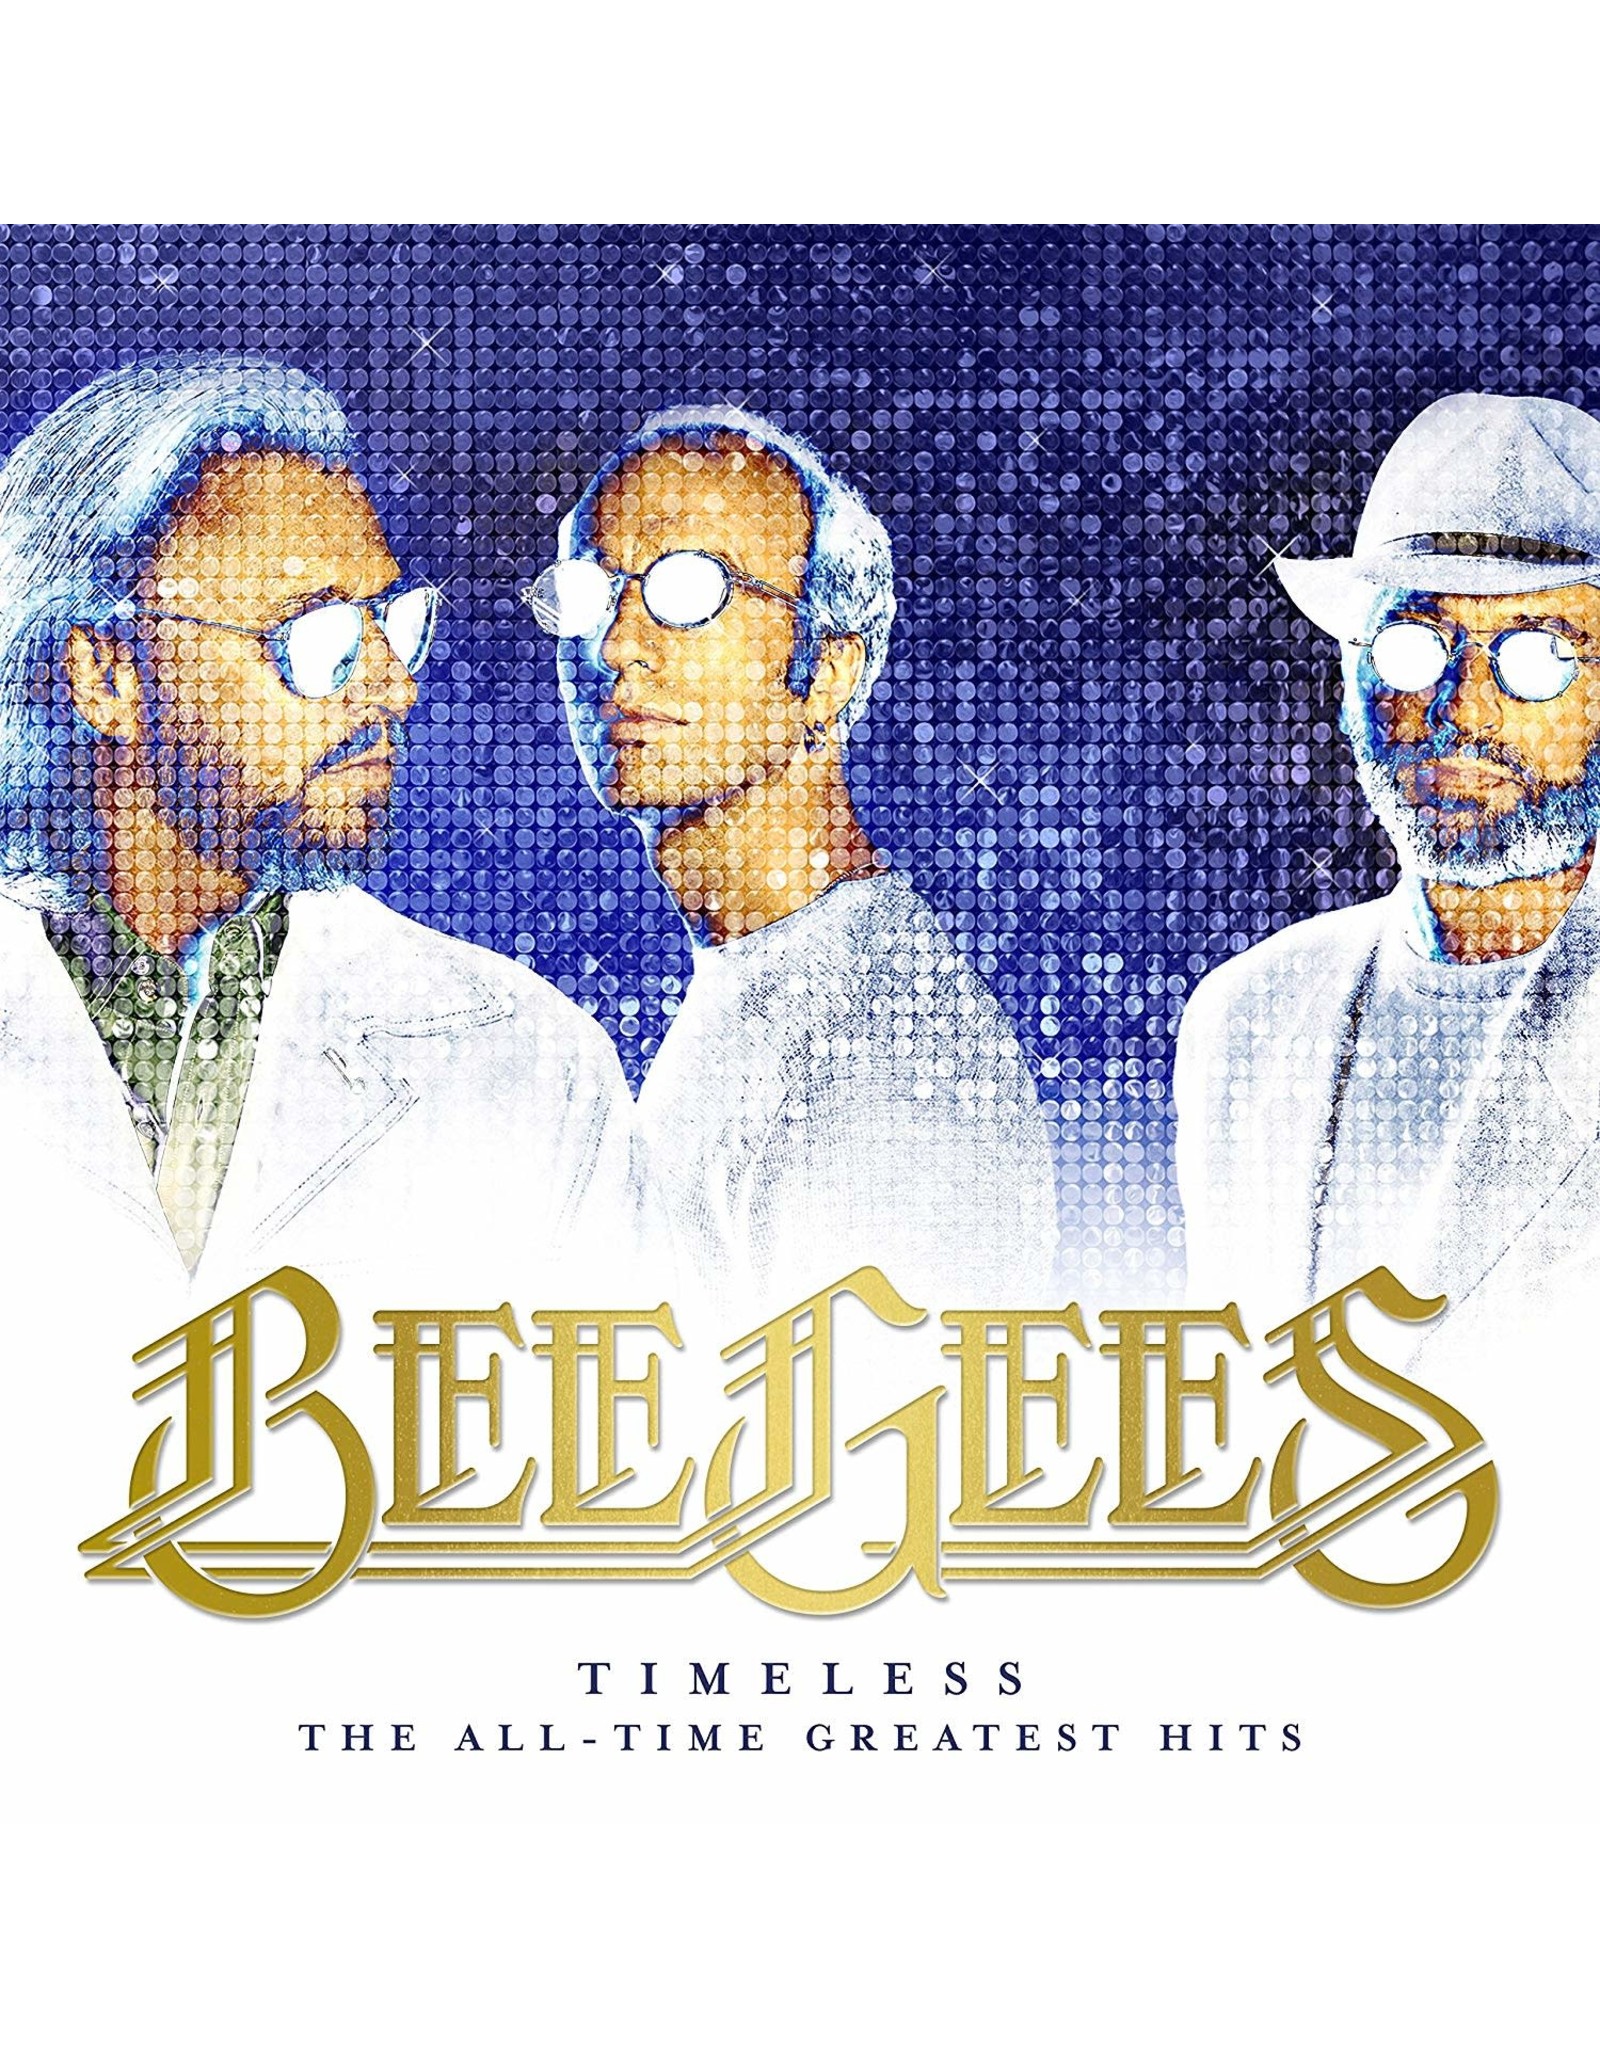 Bee Gees - Timeless: All-Time Greatest Hits